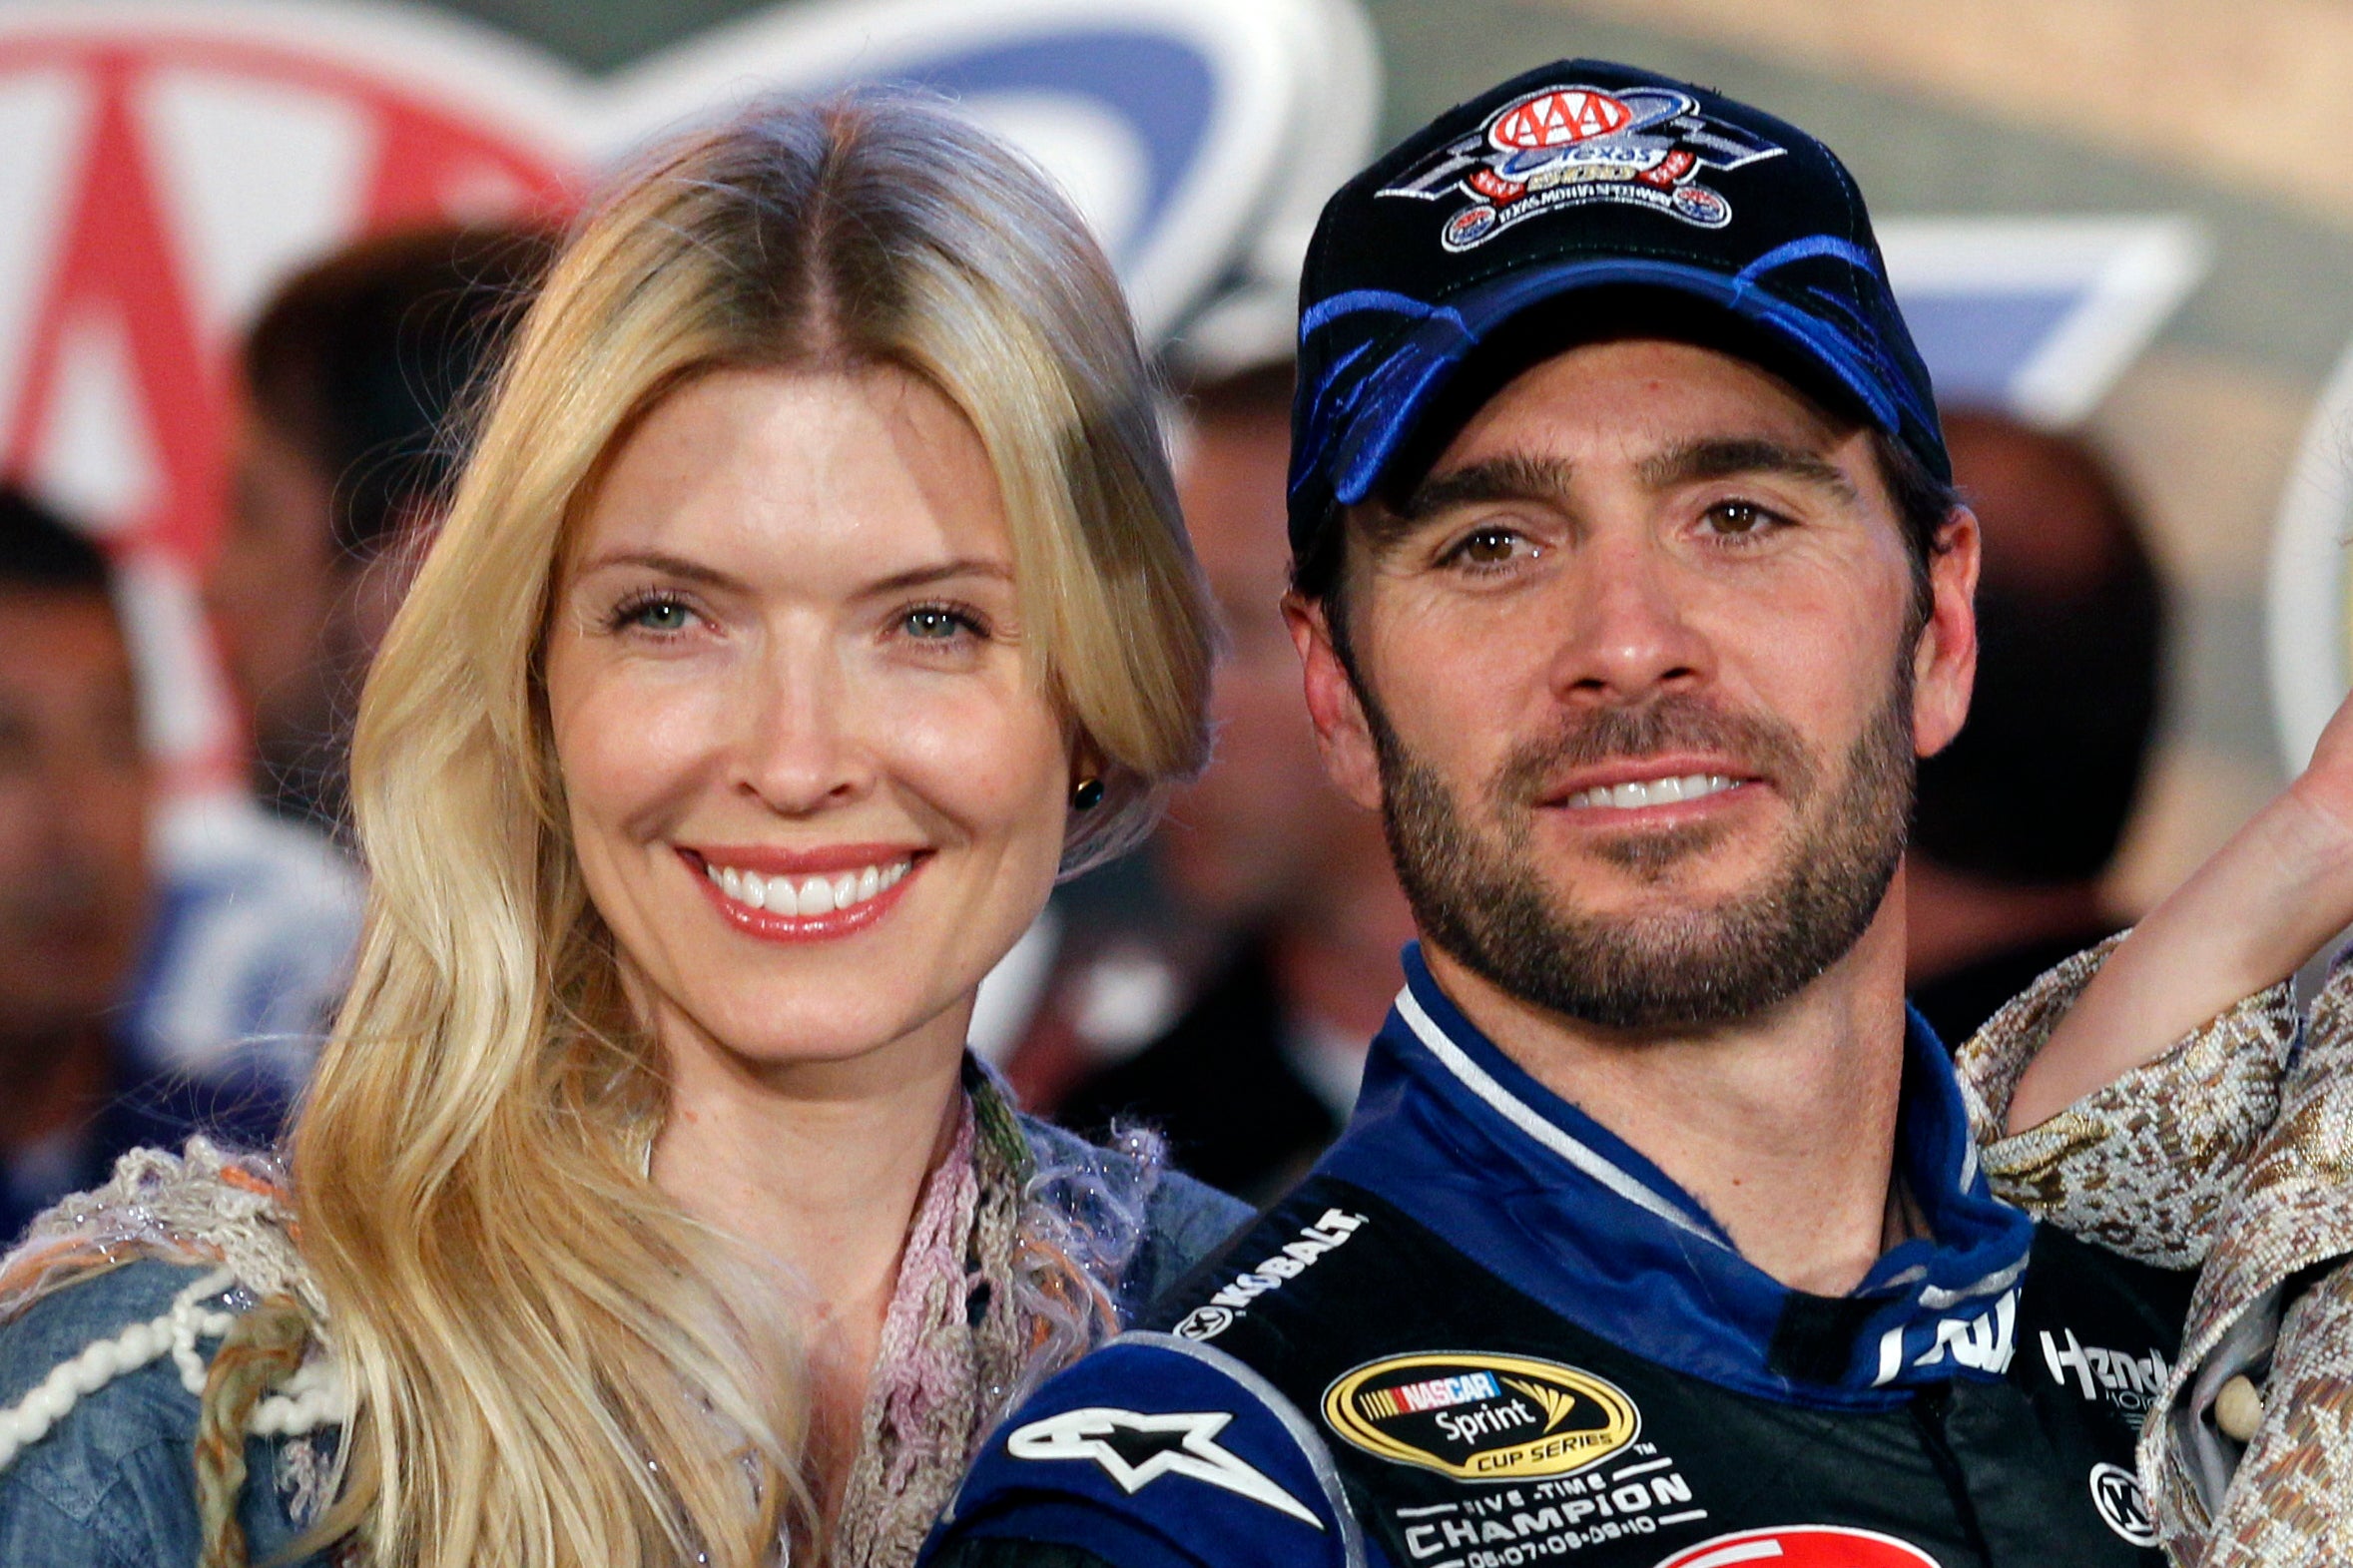 NASCAR driver Jimmie Johnson married wife Chandra in 2004, and the couple have two children